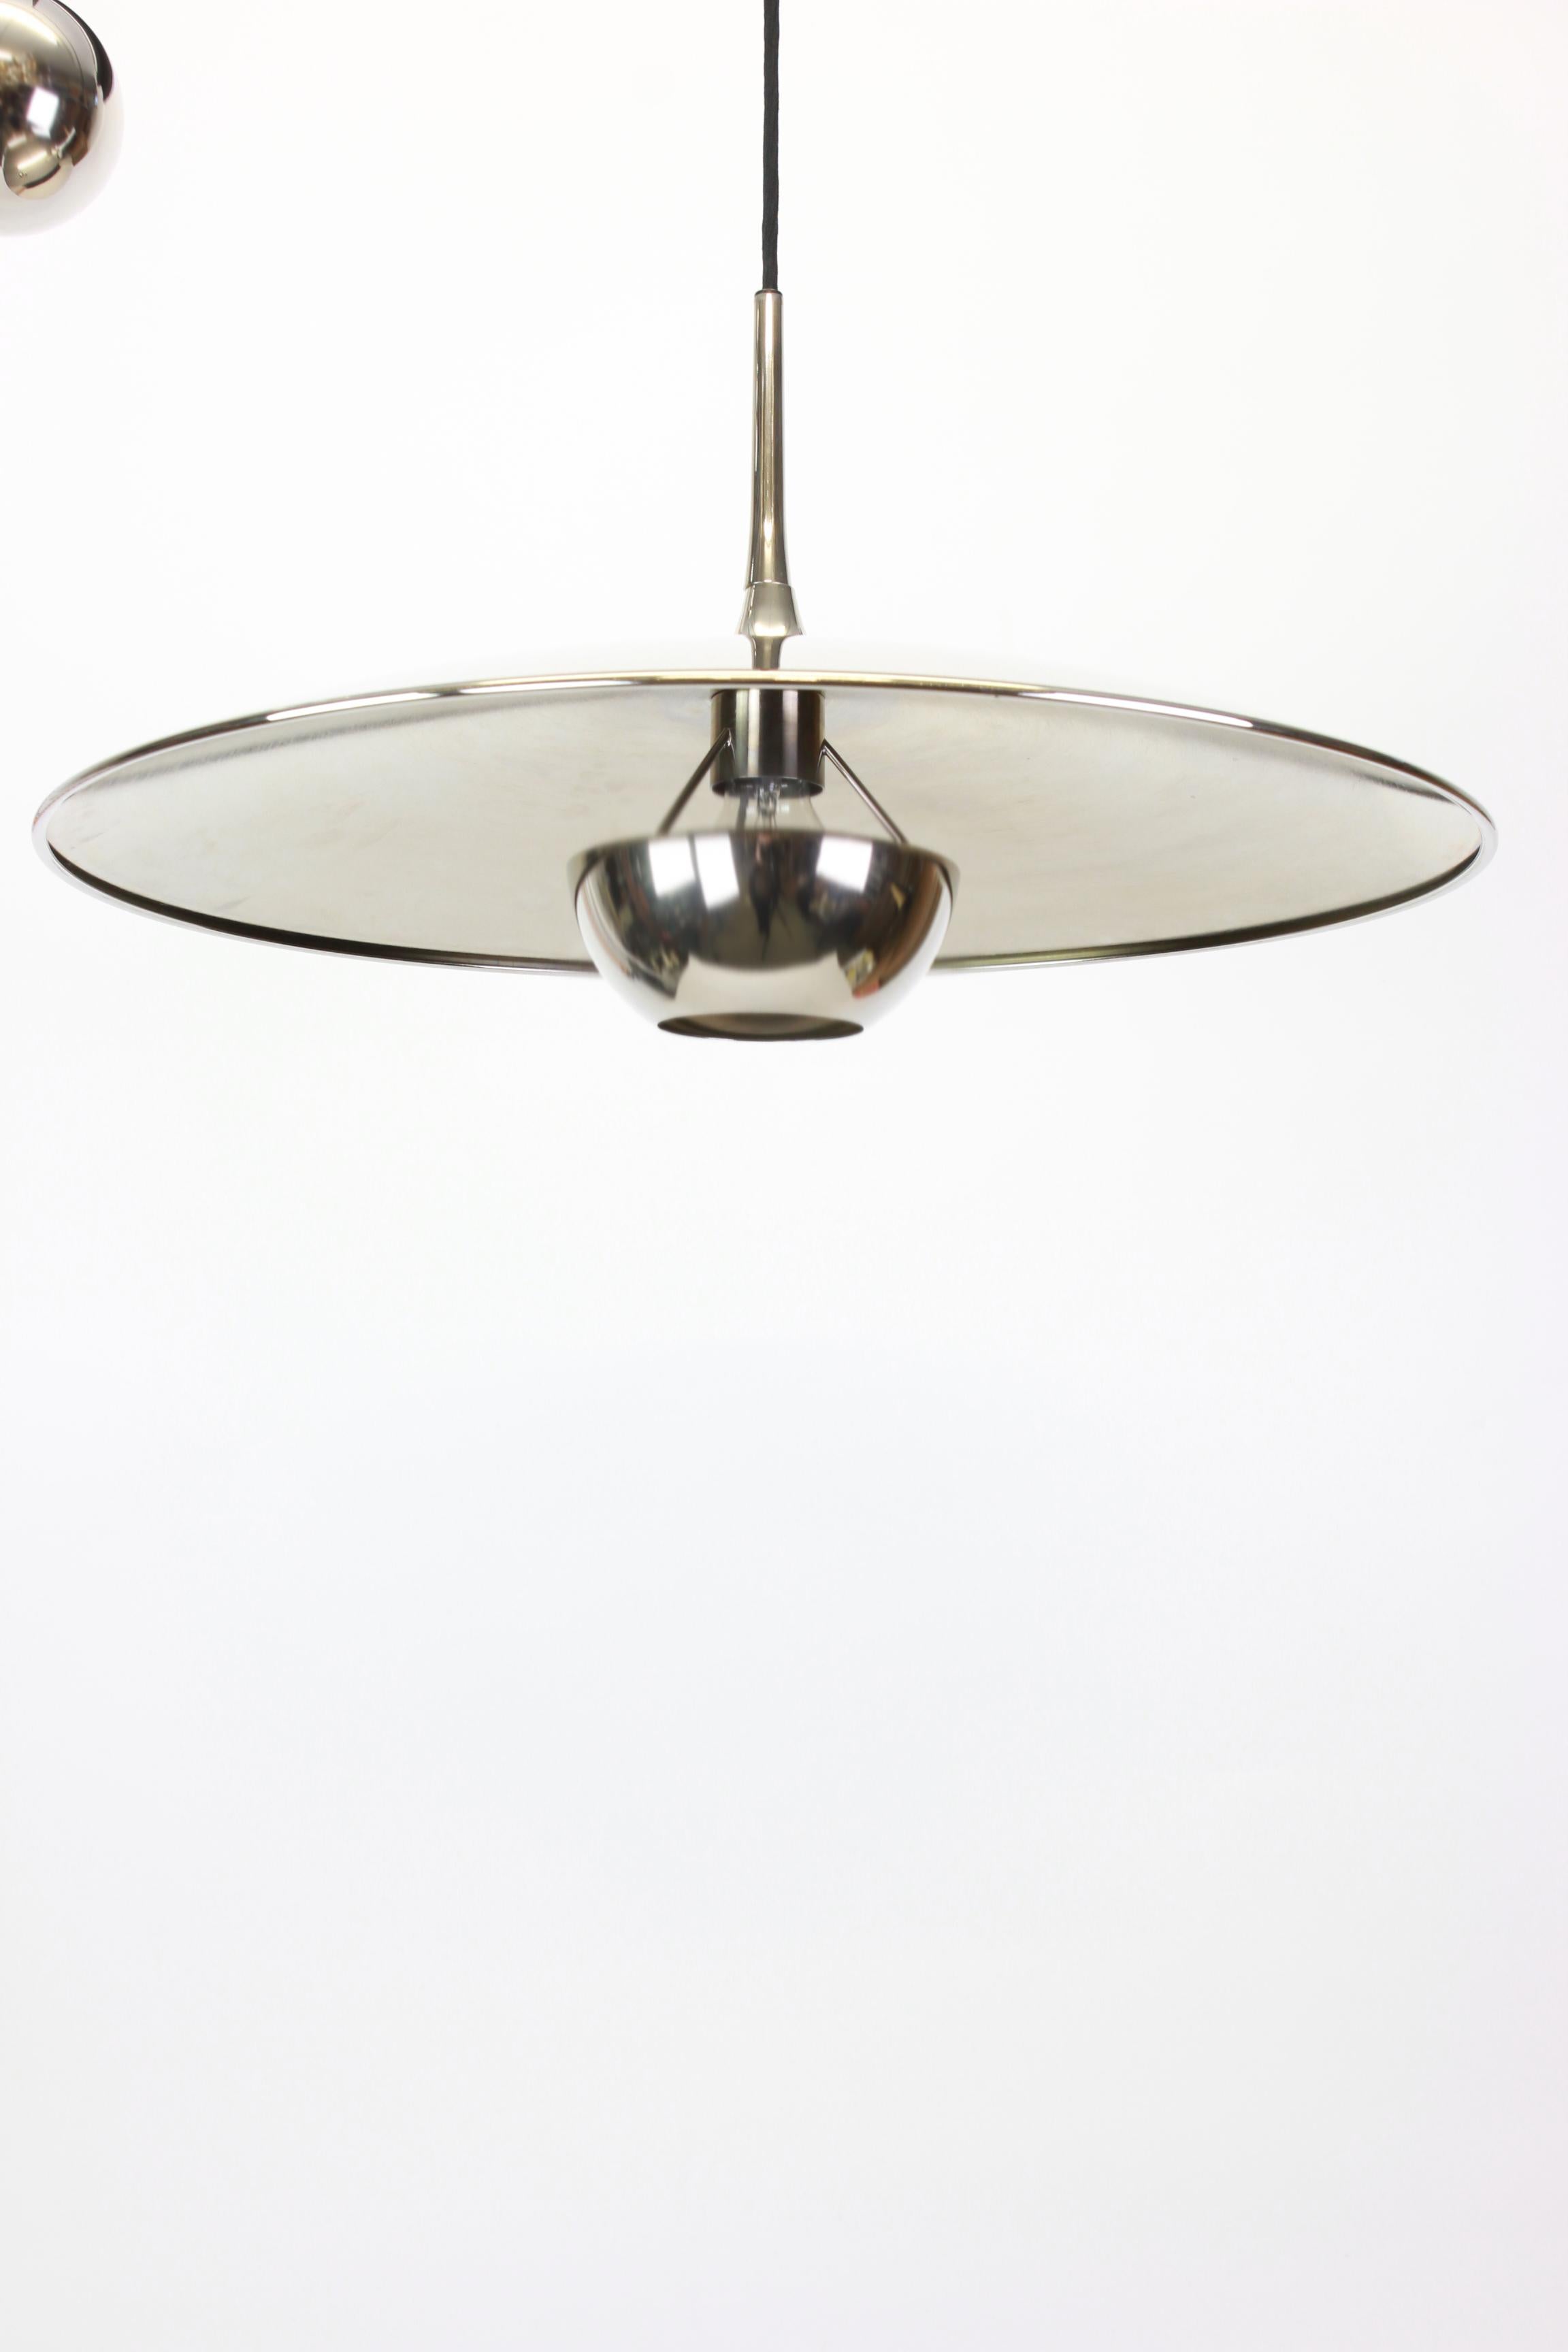 Stunning onos chrome pendant with adjustable counterweight designed by Florian Schulz, Germany, 1970s

It is a masterpiece of design and craftsmanship. It seamlessly blends functionality and aesthetics to create a lighting fixture that's as much an